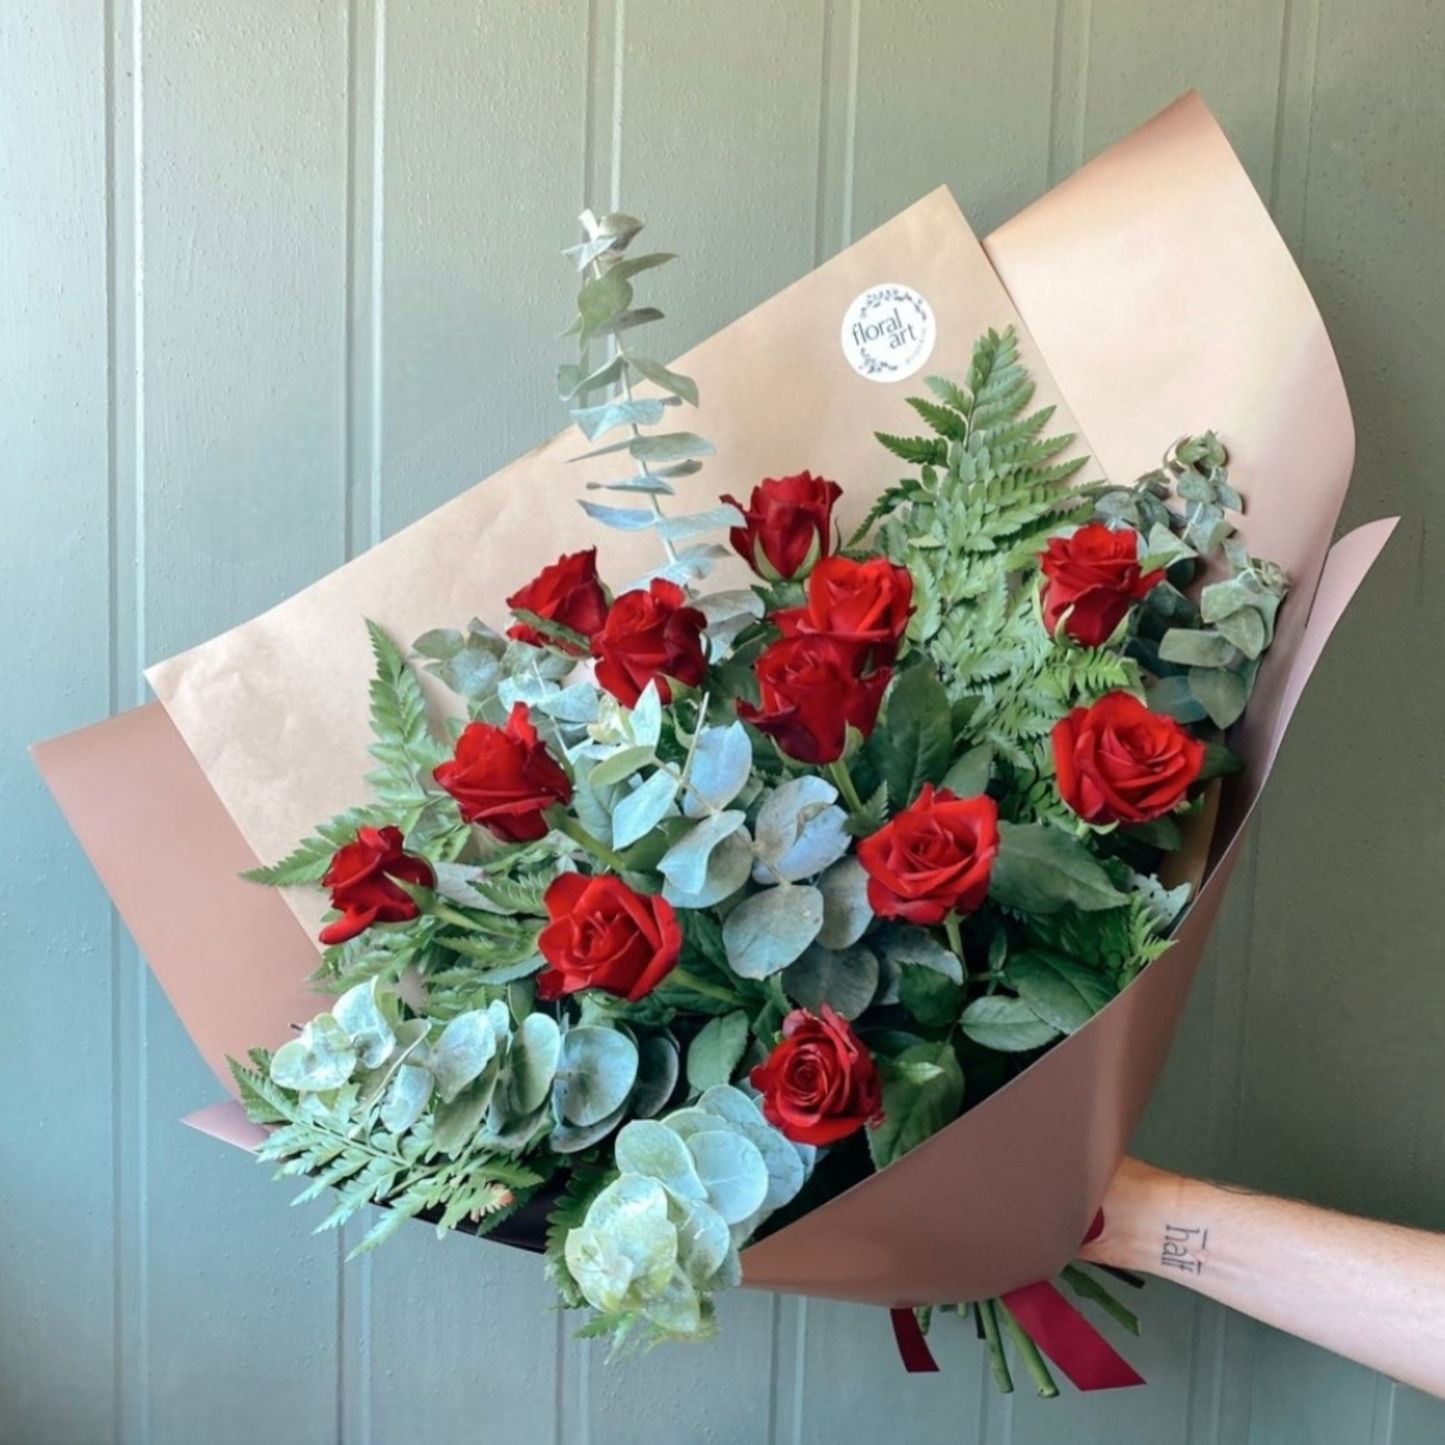 12 red roses and foliages in a bouquet